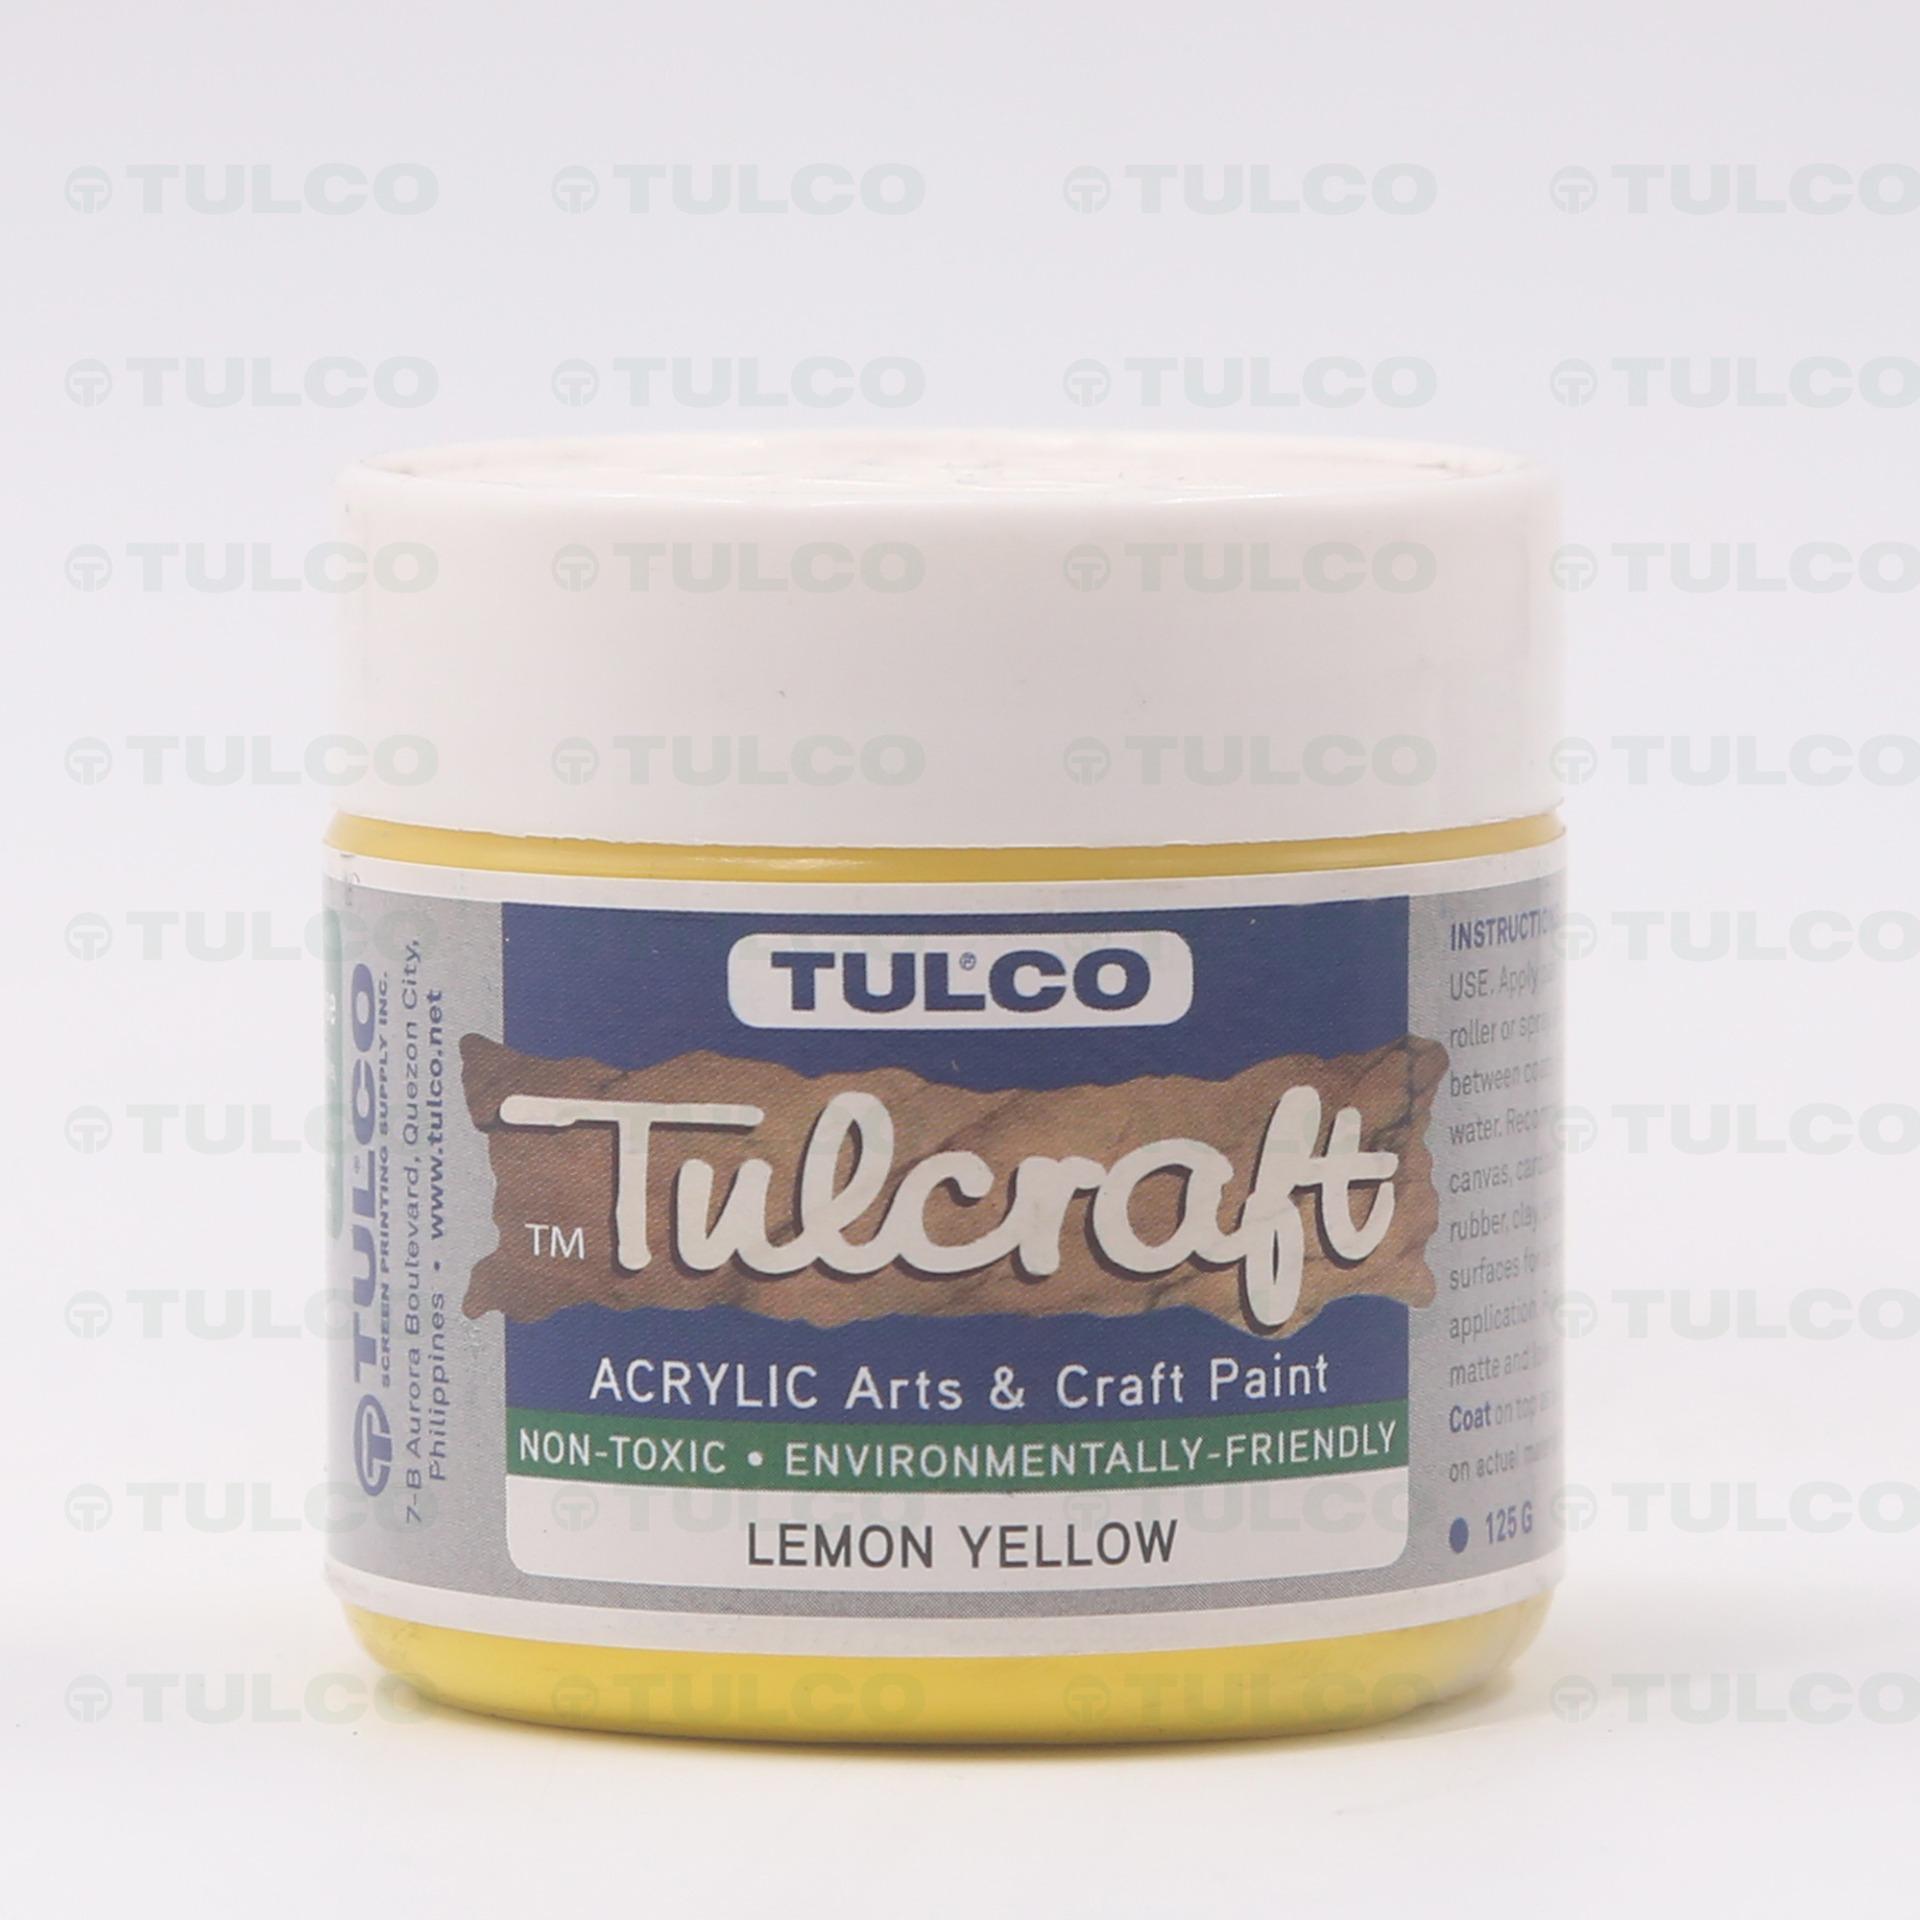 tulco paint for shoes